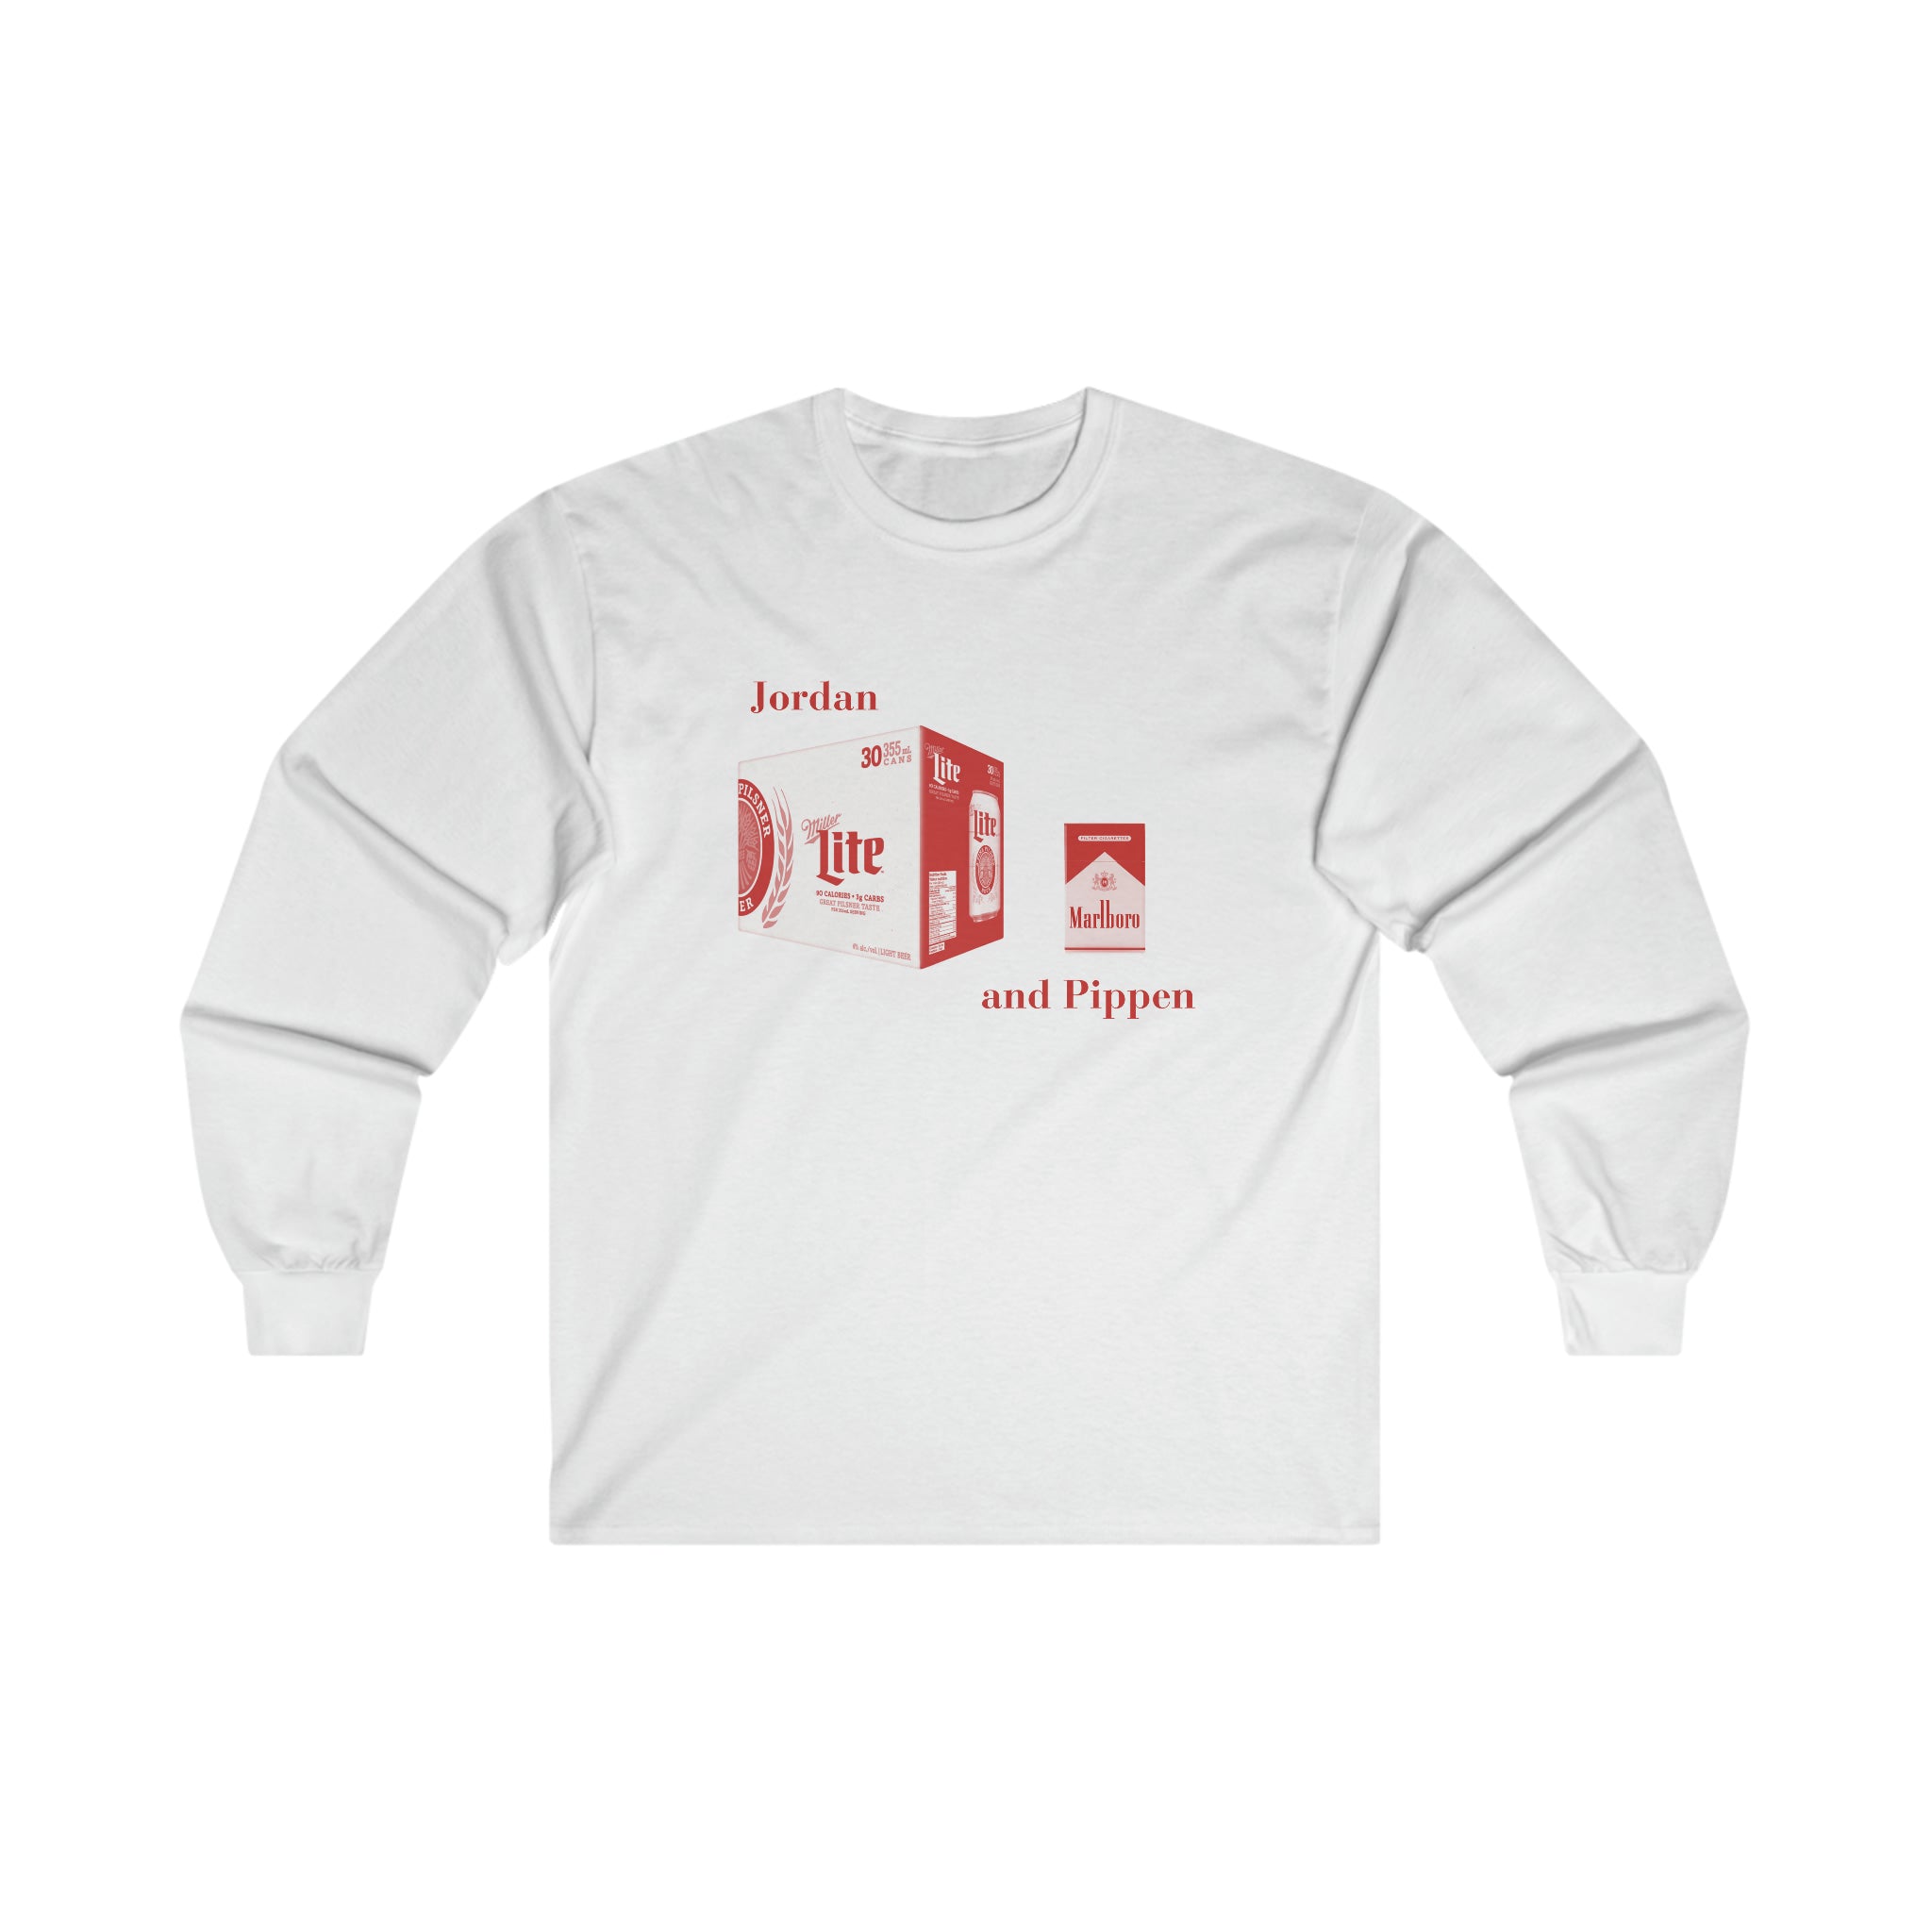 Jordan and Pippen Miller and Cigarettes - Ultra Cotton Long Sleeve Tee